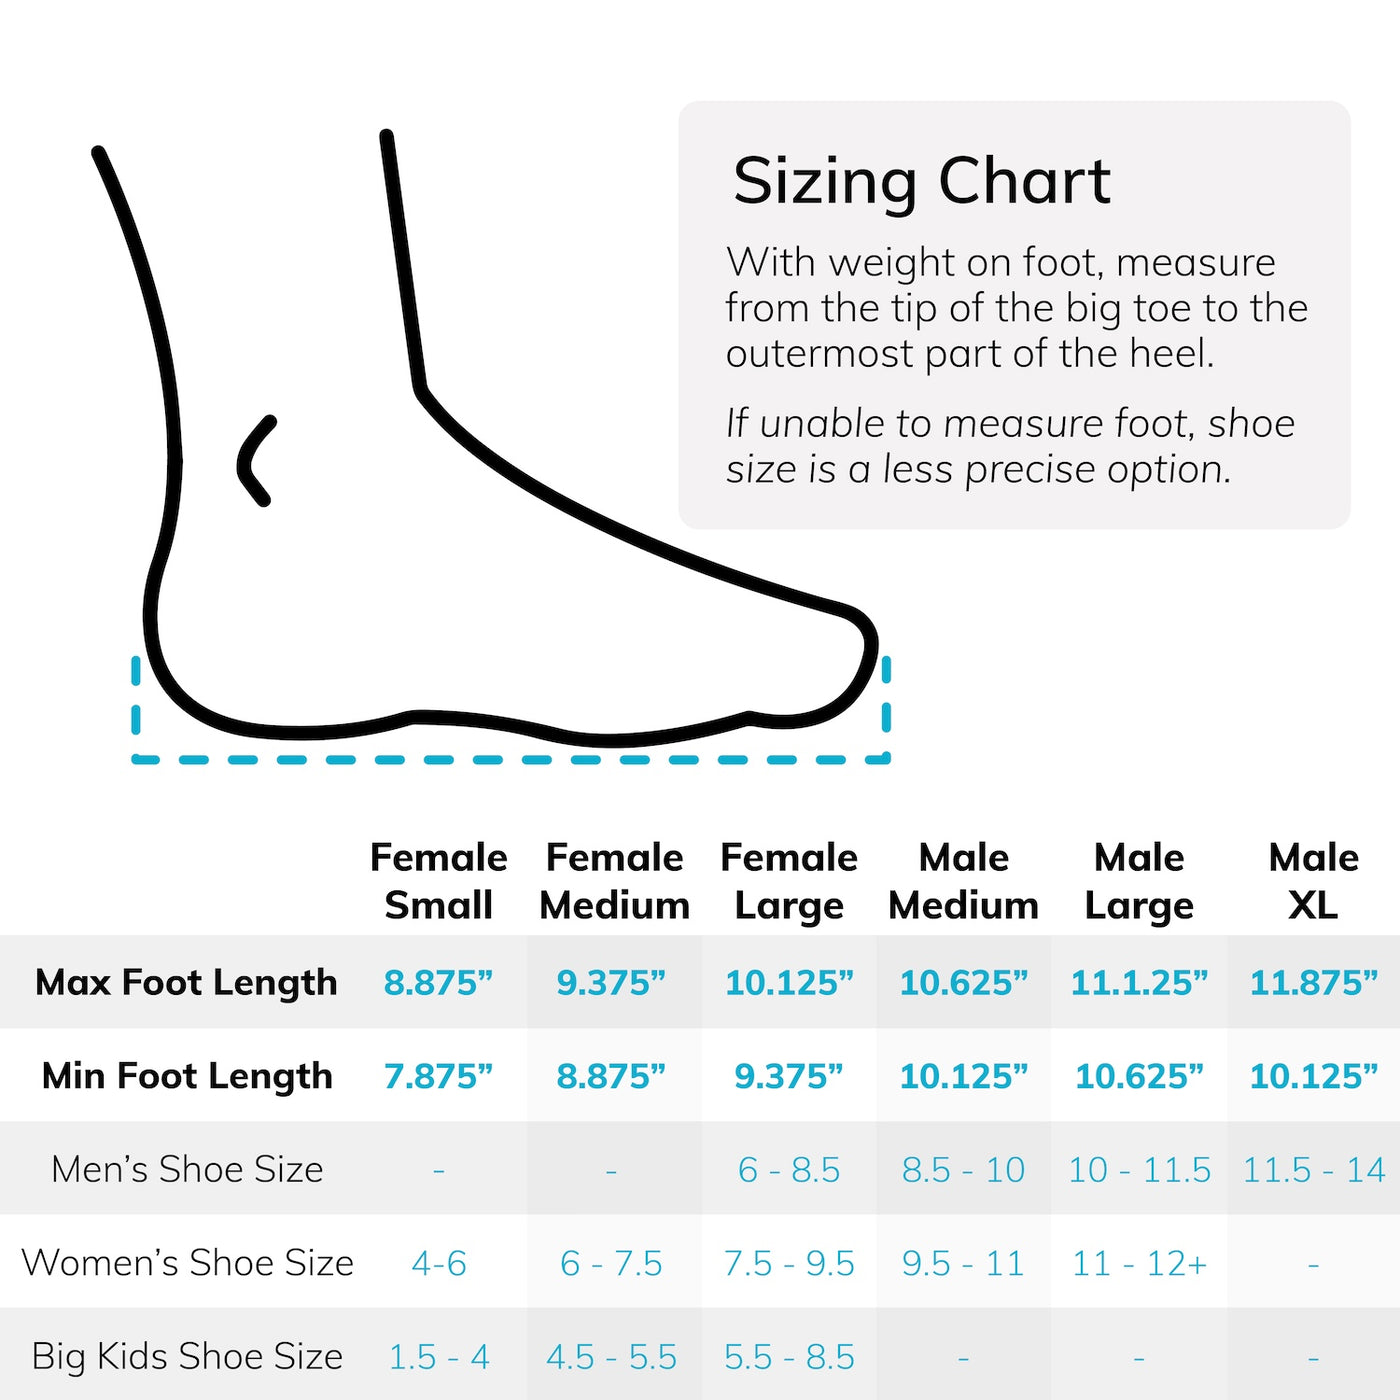 Sizing chart for broken foot walking cast. Available in sizes S-XL for men, women, and big kids.